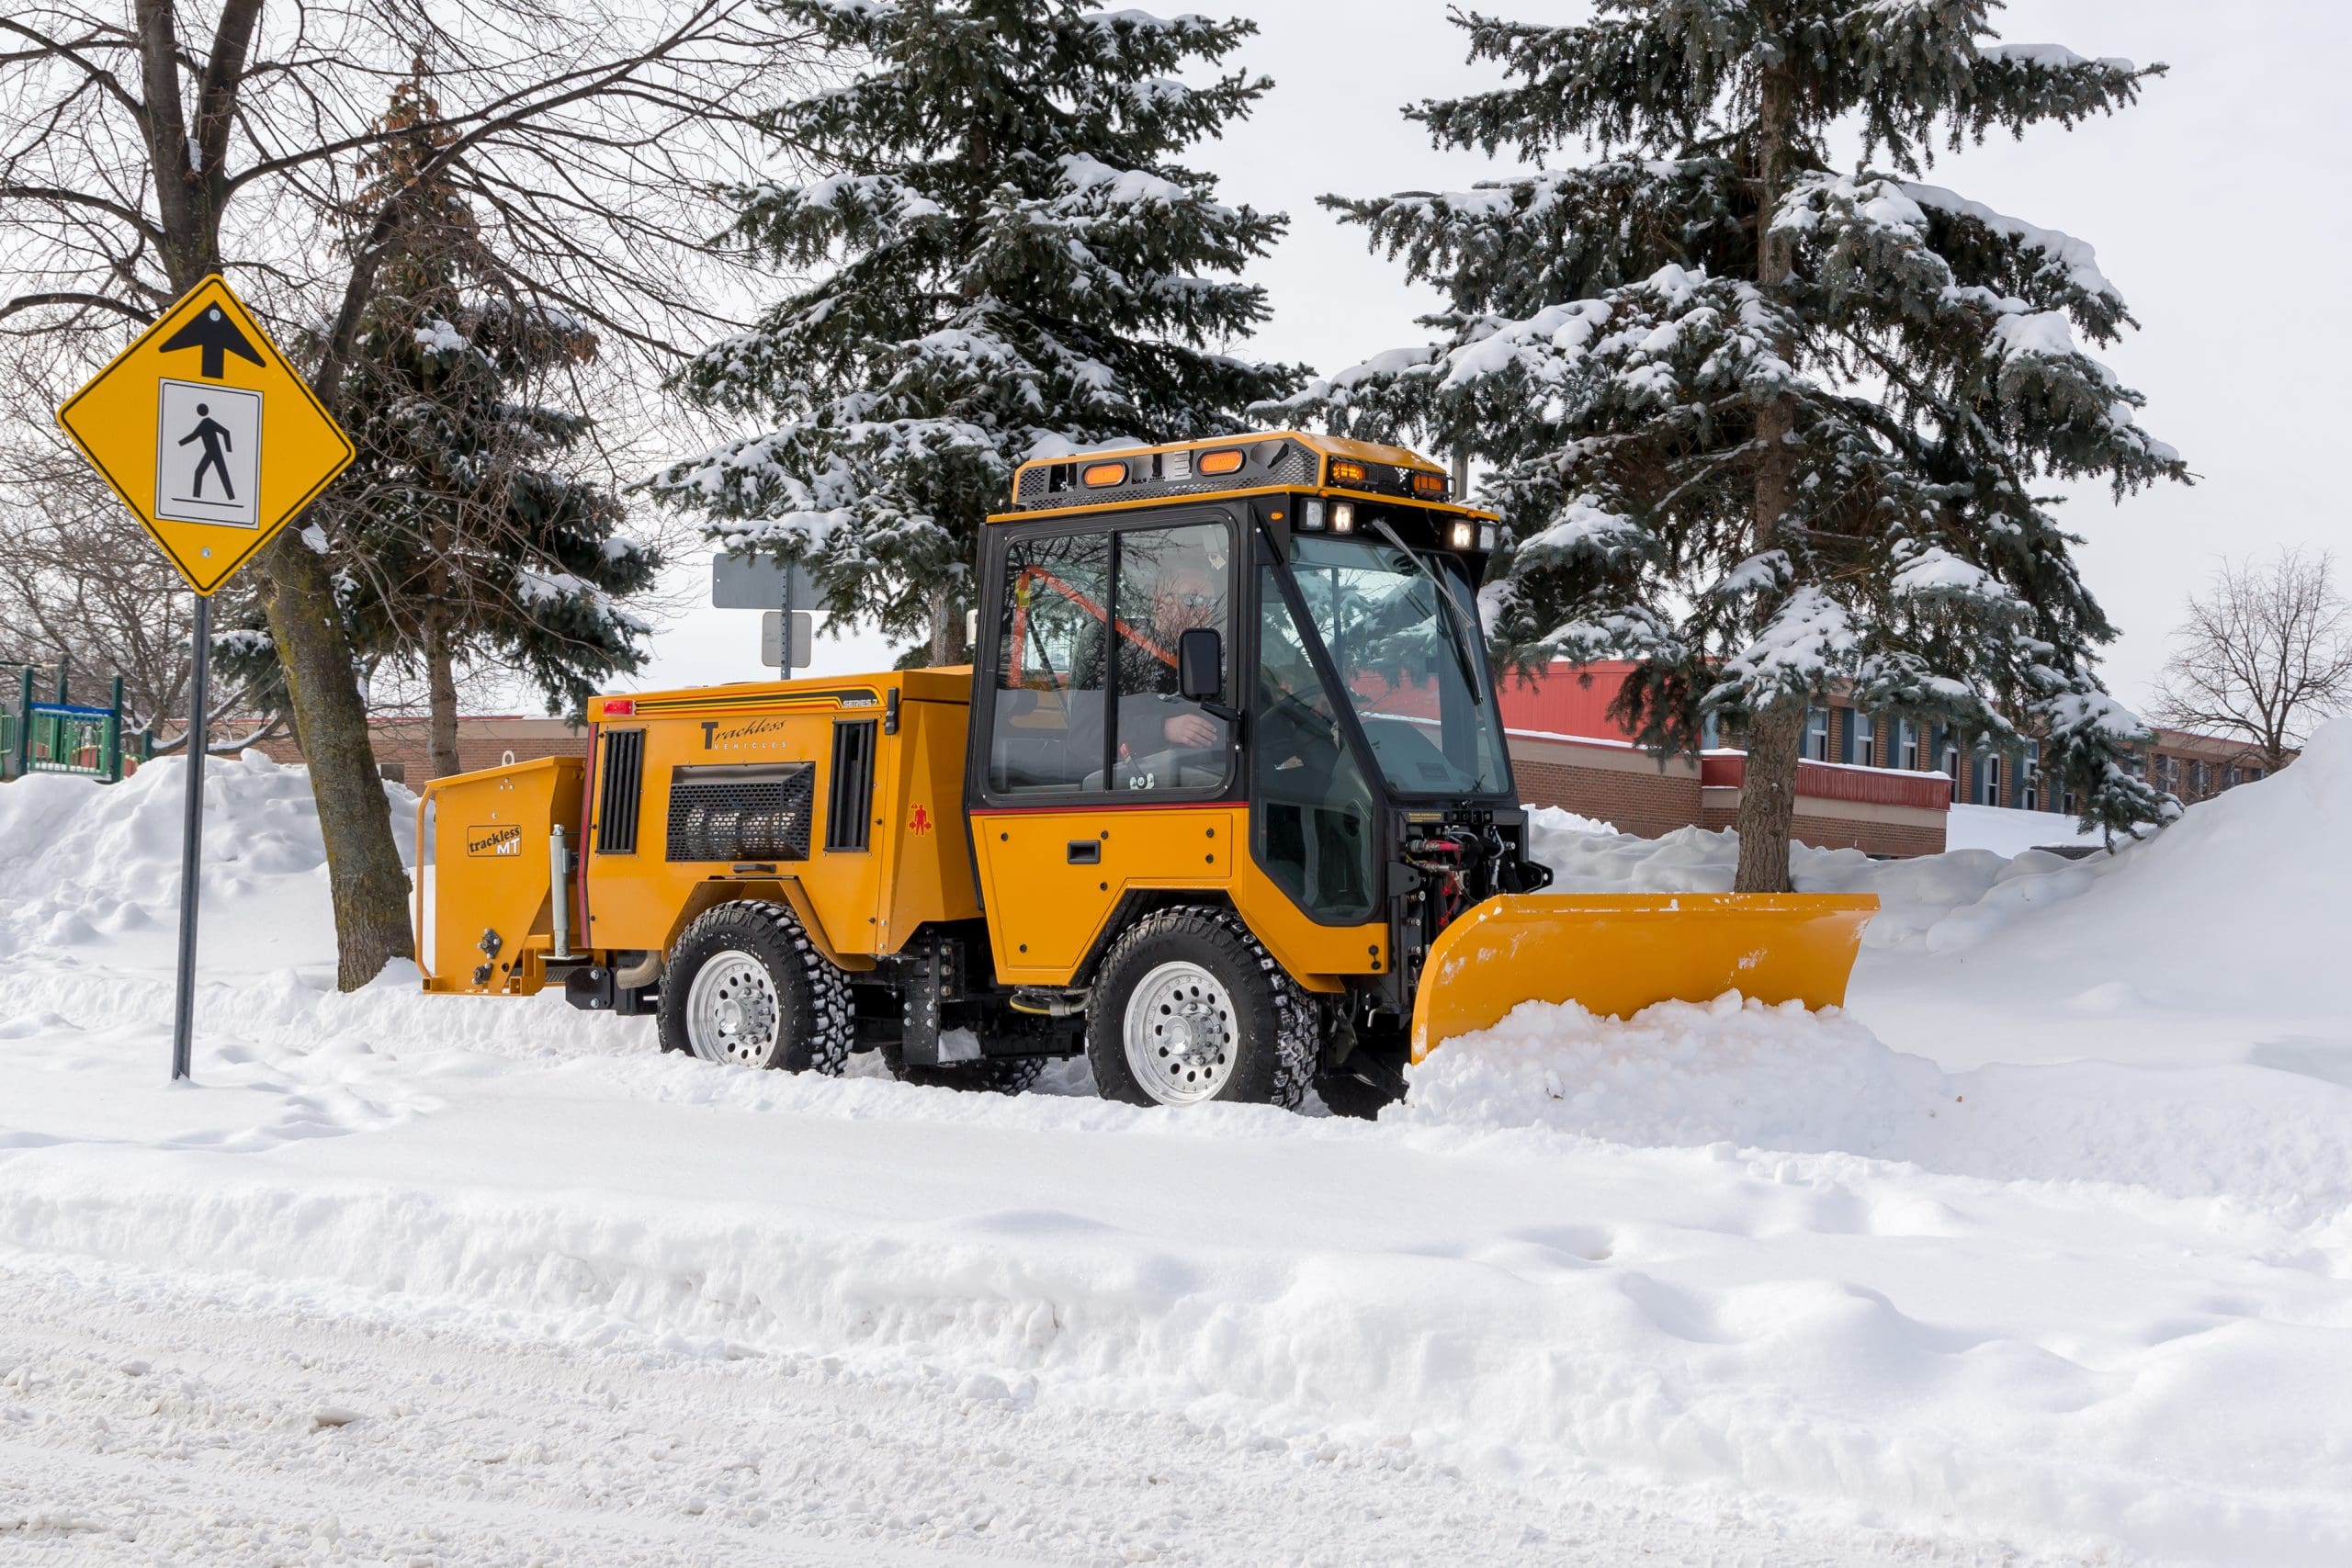 trackless vehicles angle snowplow attachment on sidewalk municipal tractor